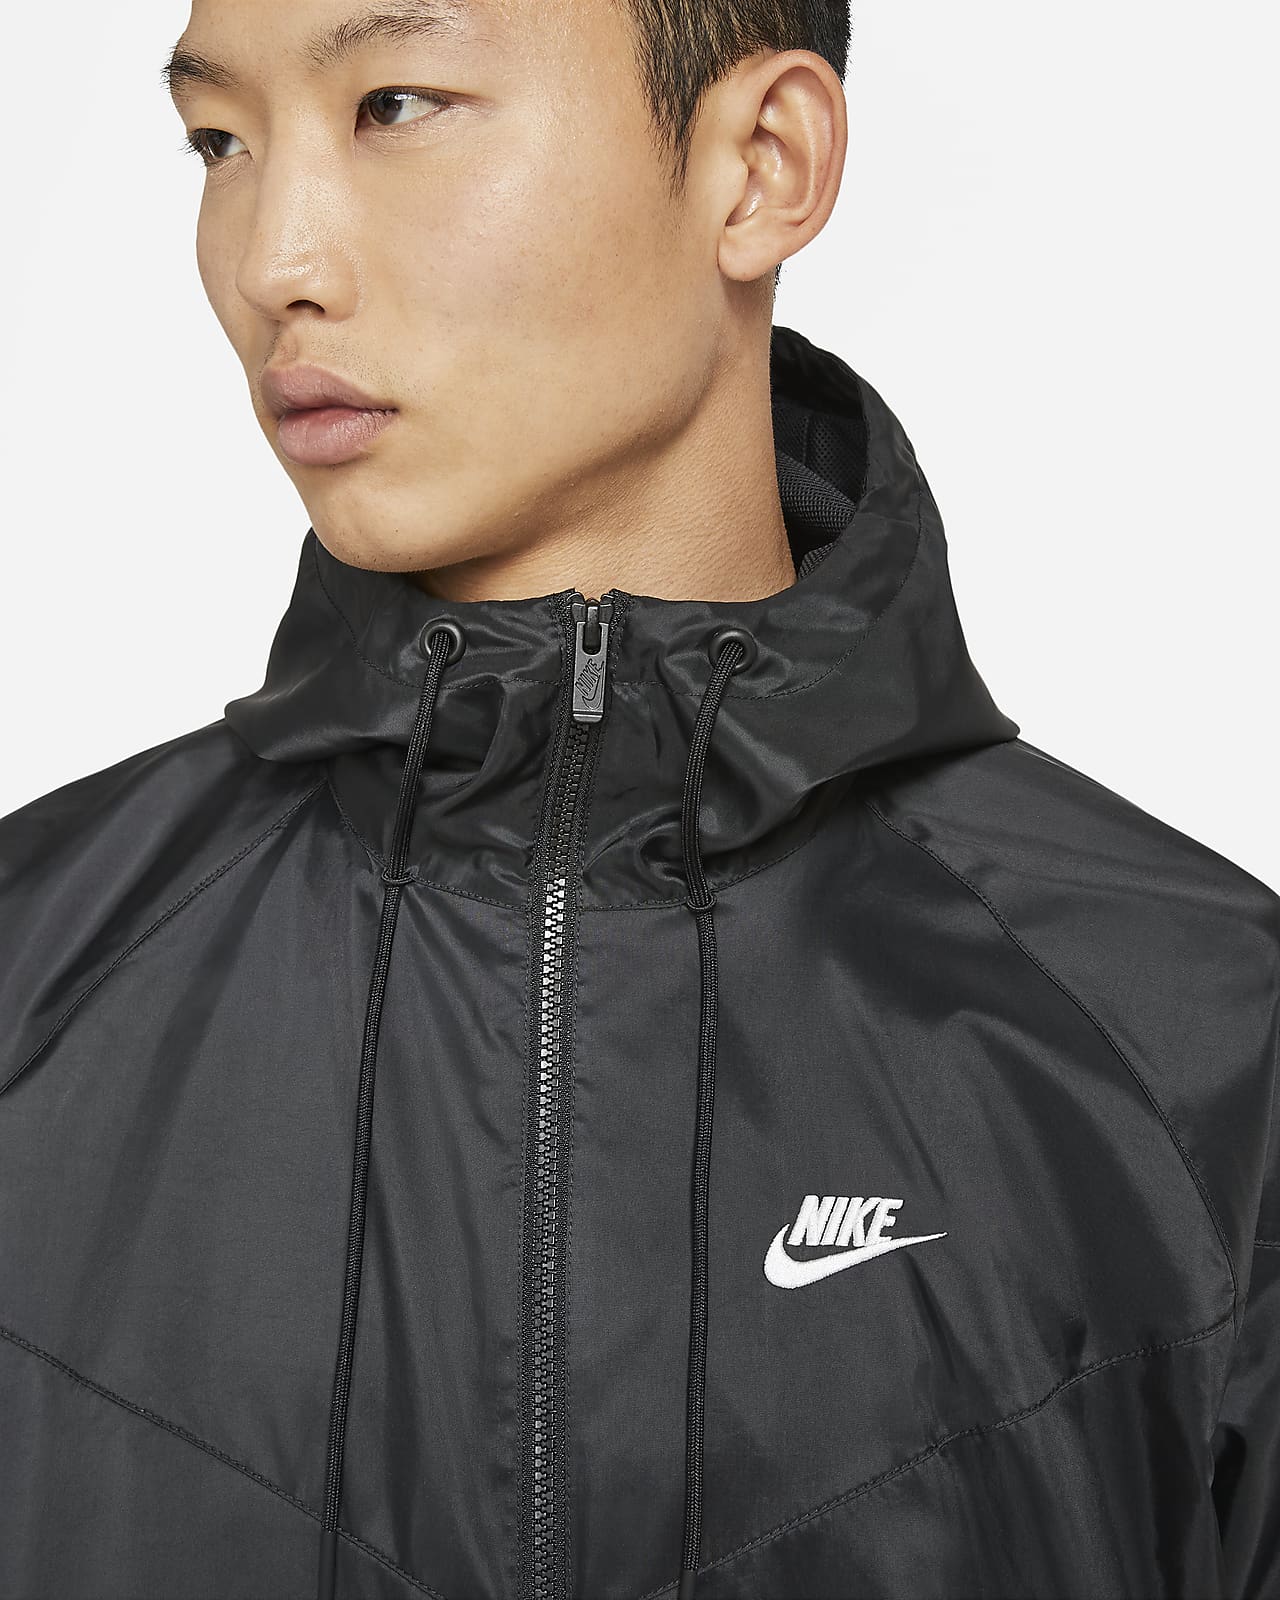 NIKE UPPER TRACK JACKET at Rs 775/piece in New Delhi | ID: 2852857311597